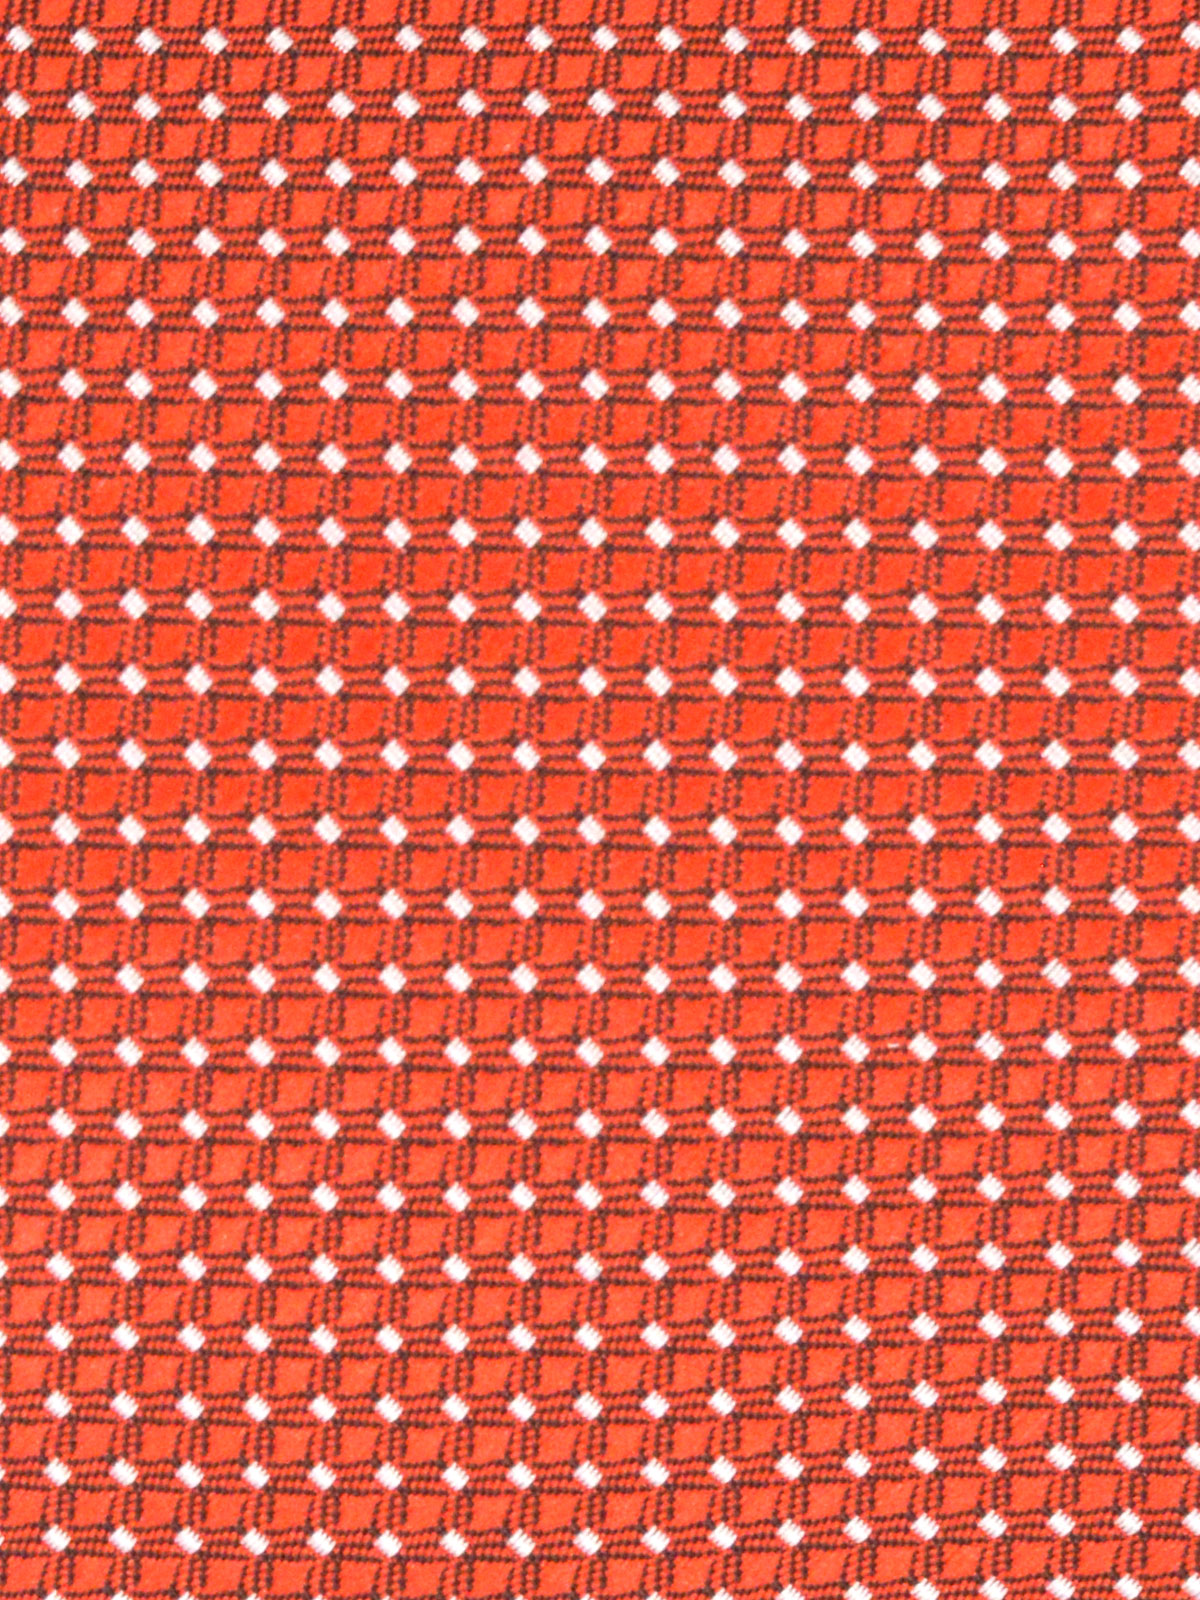  red tie in squares with white t  - 10037 - € 14.06 img2